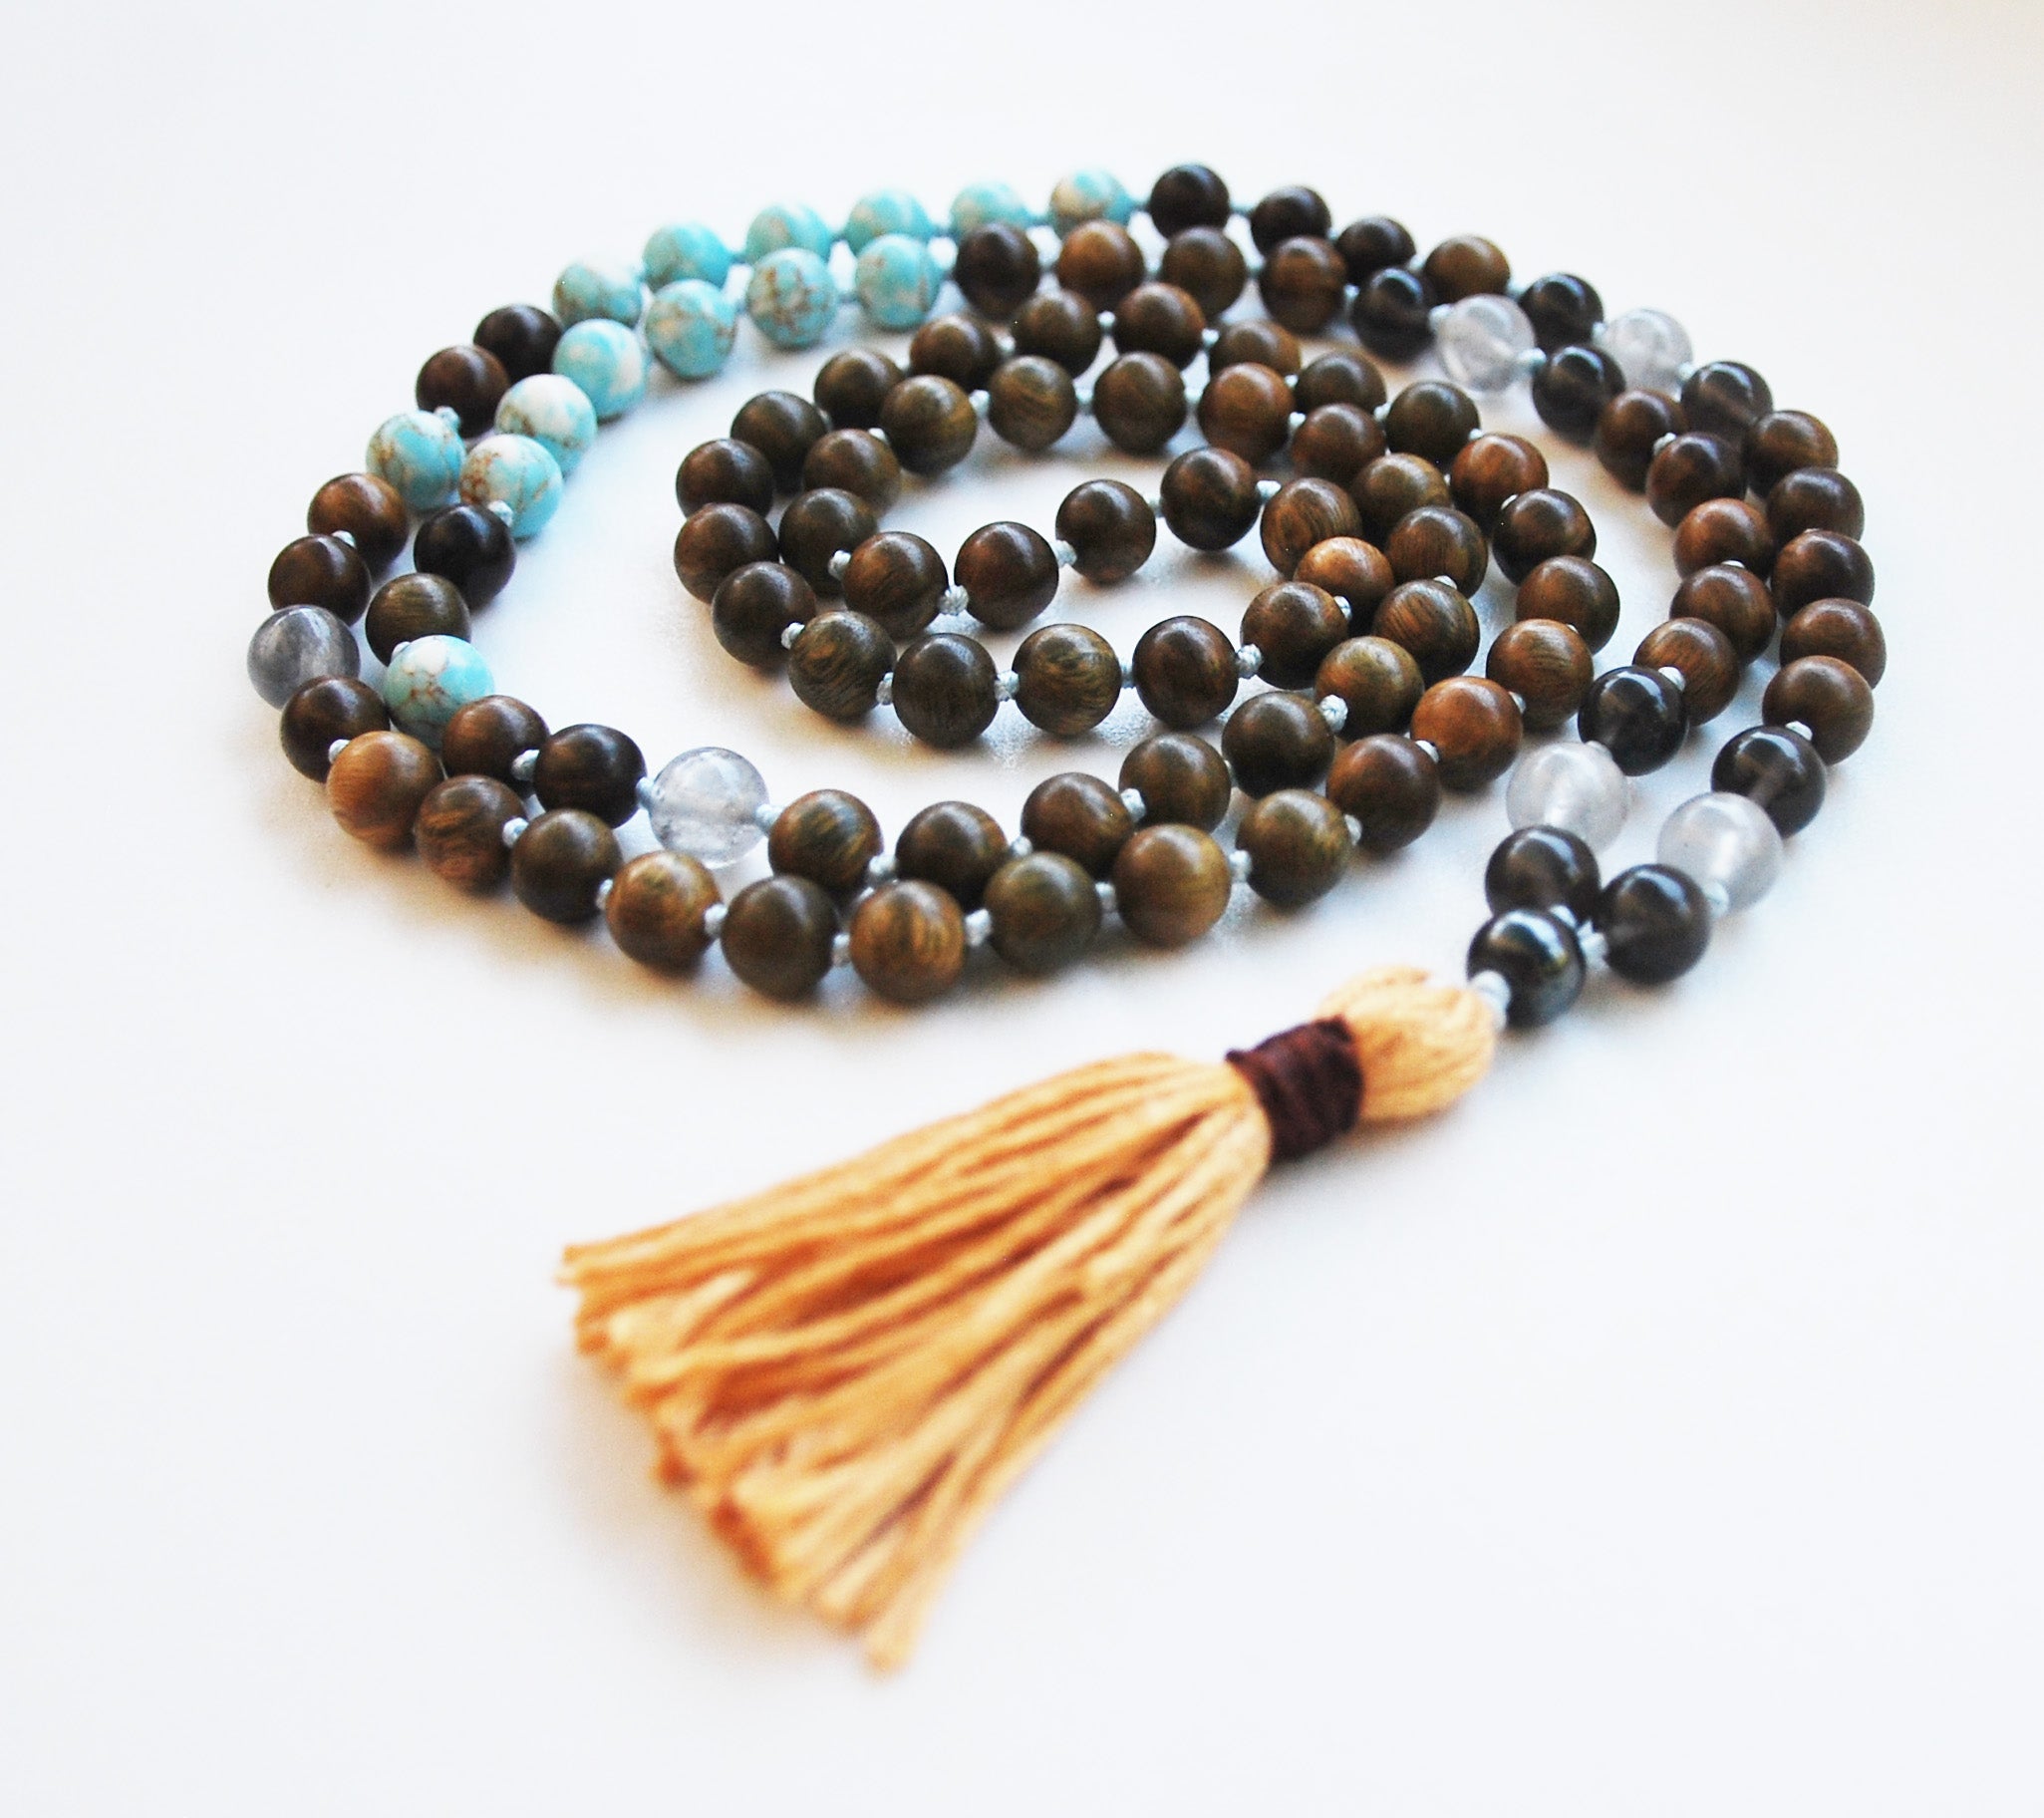 8mm Green Sandalwood & Blue Turquoise 108 Knotted Mala Necklace with Cotton Tassel